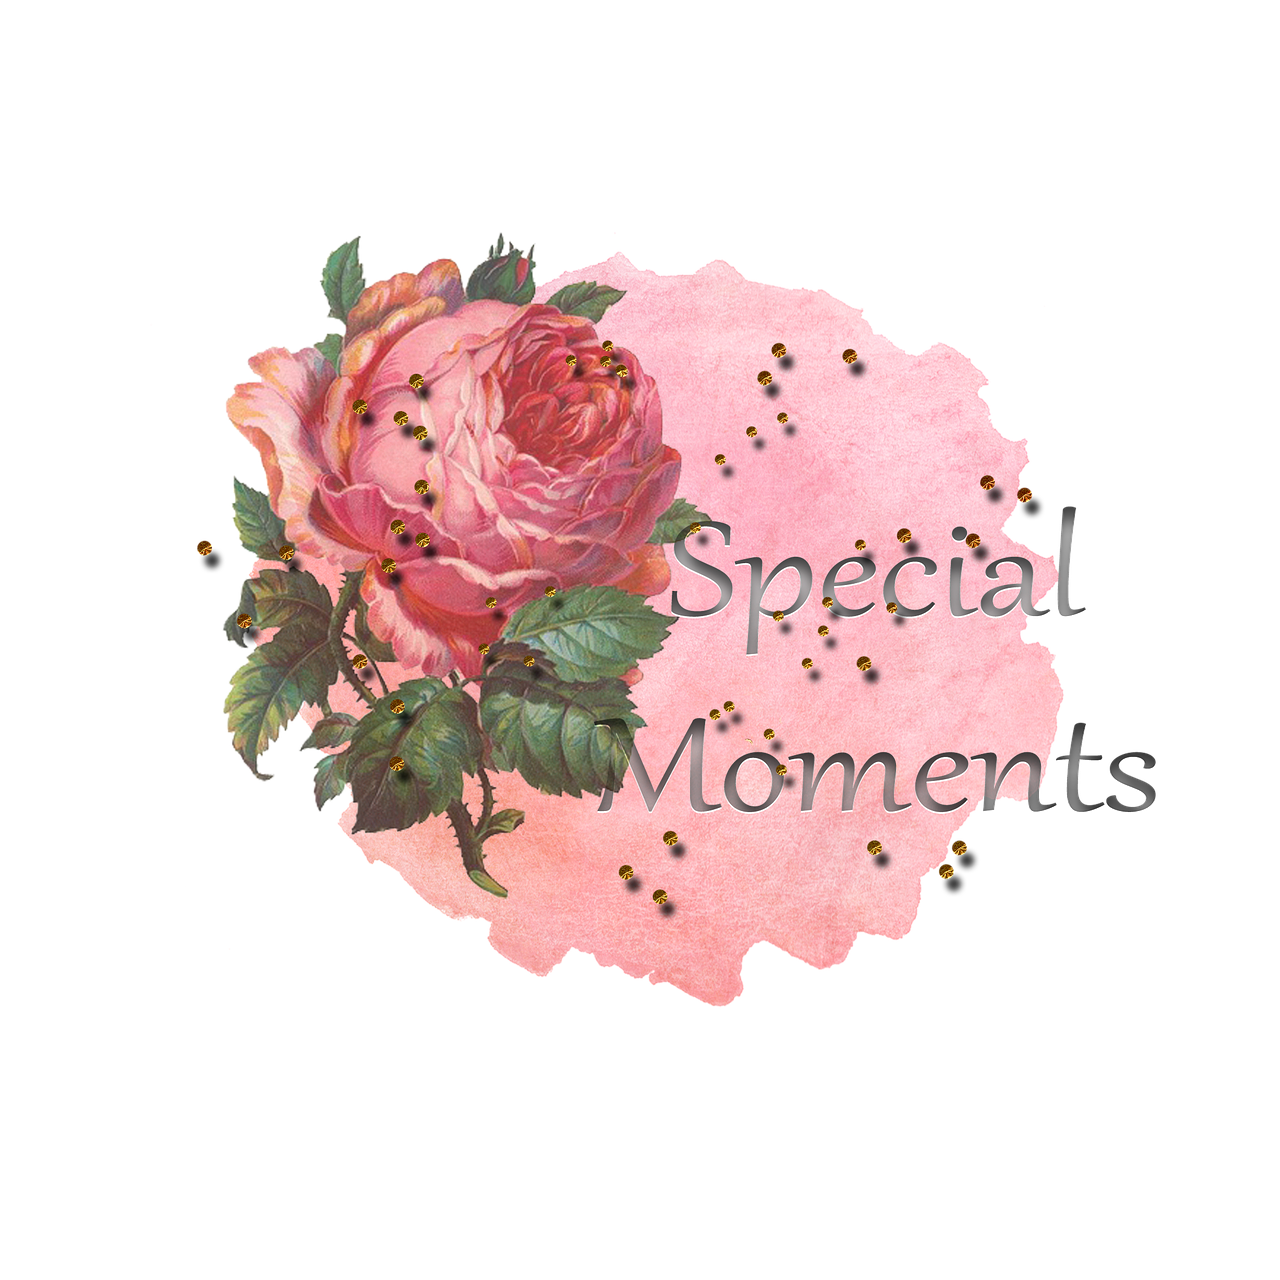 a pink rose with the words special moments on it, digital art, rococo elements, 3 4 5 3 1, black, monet painted